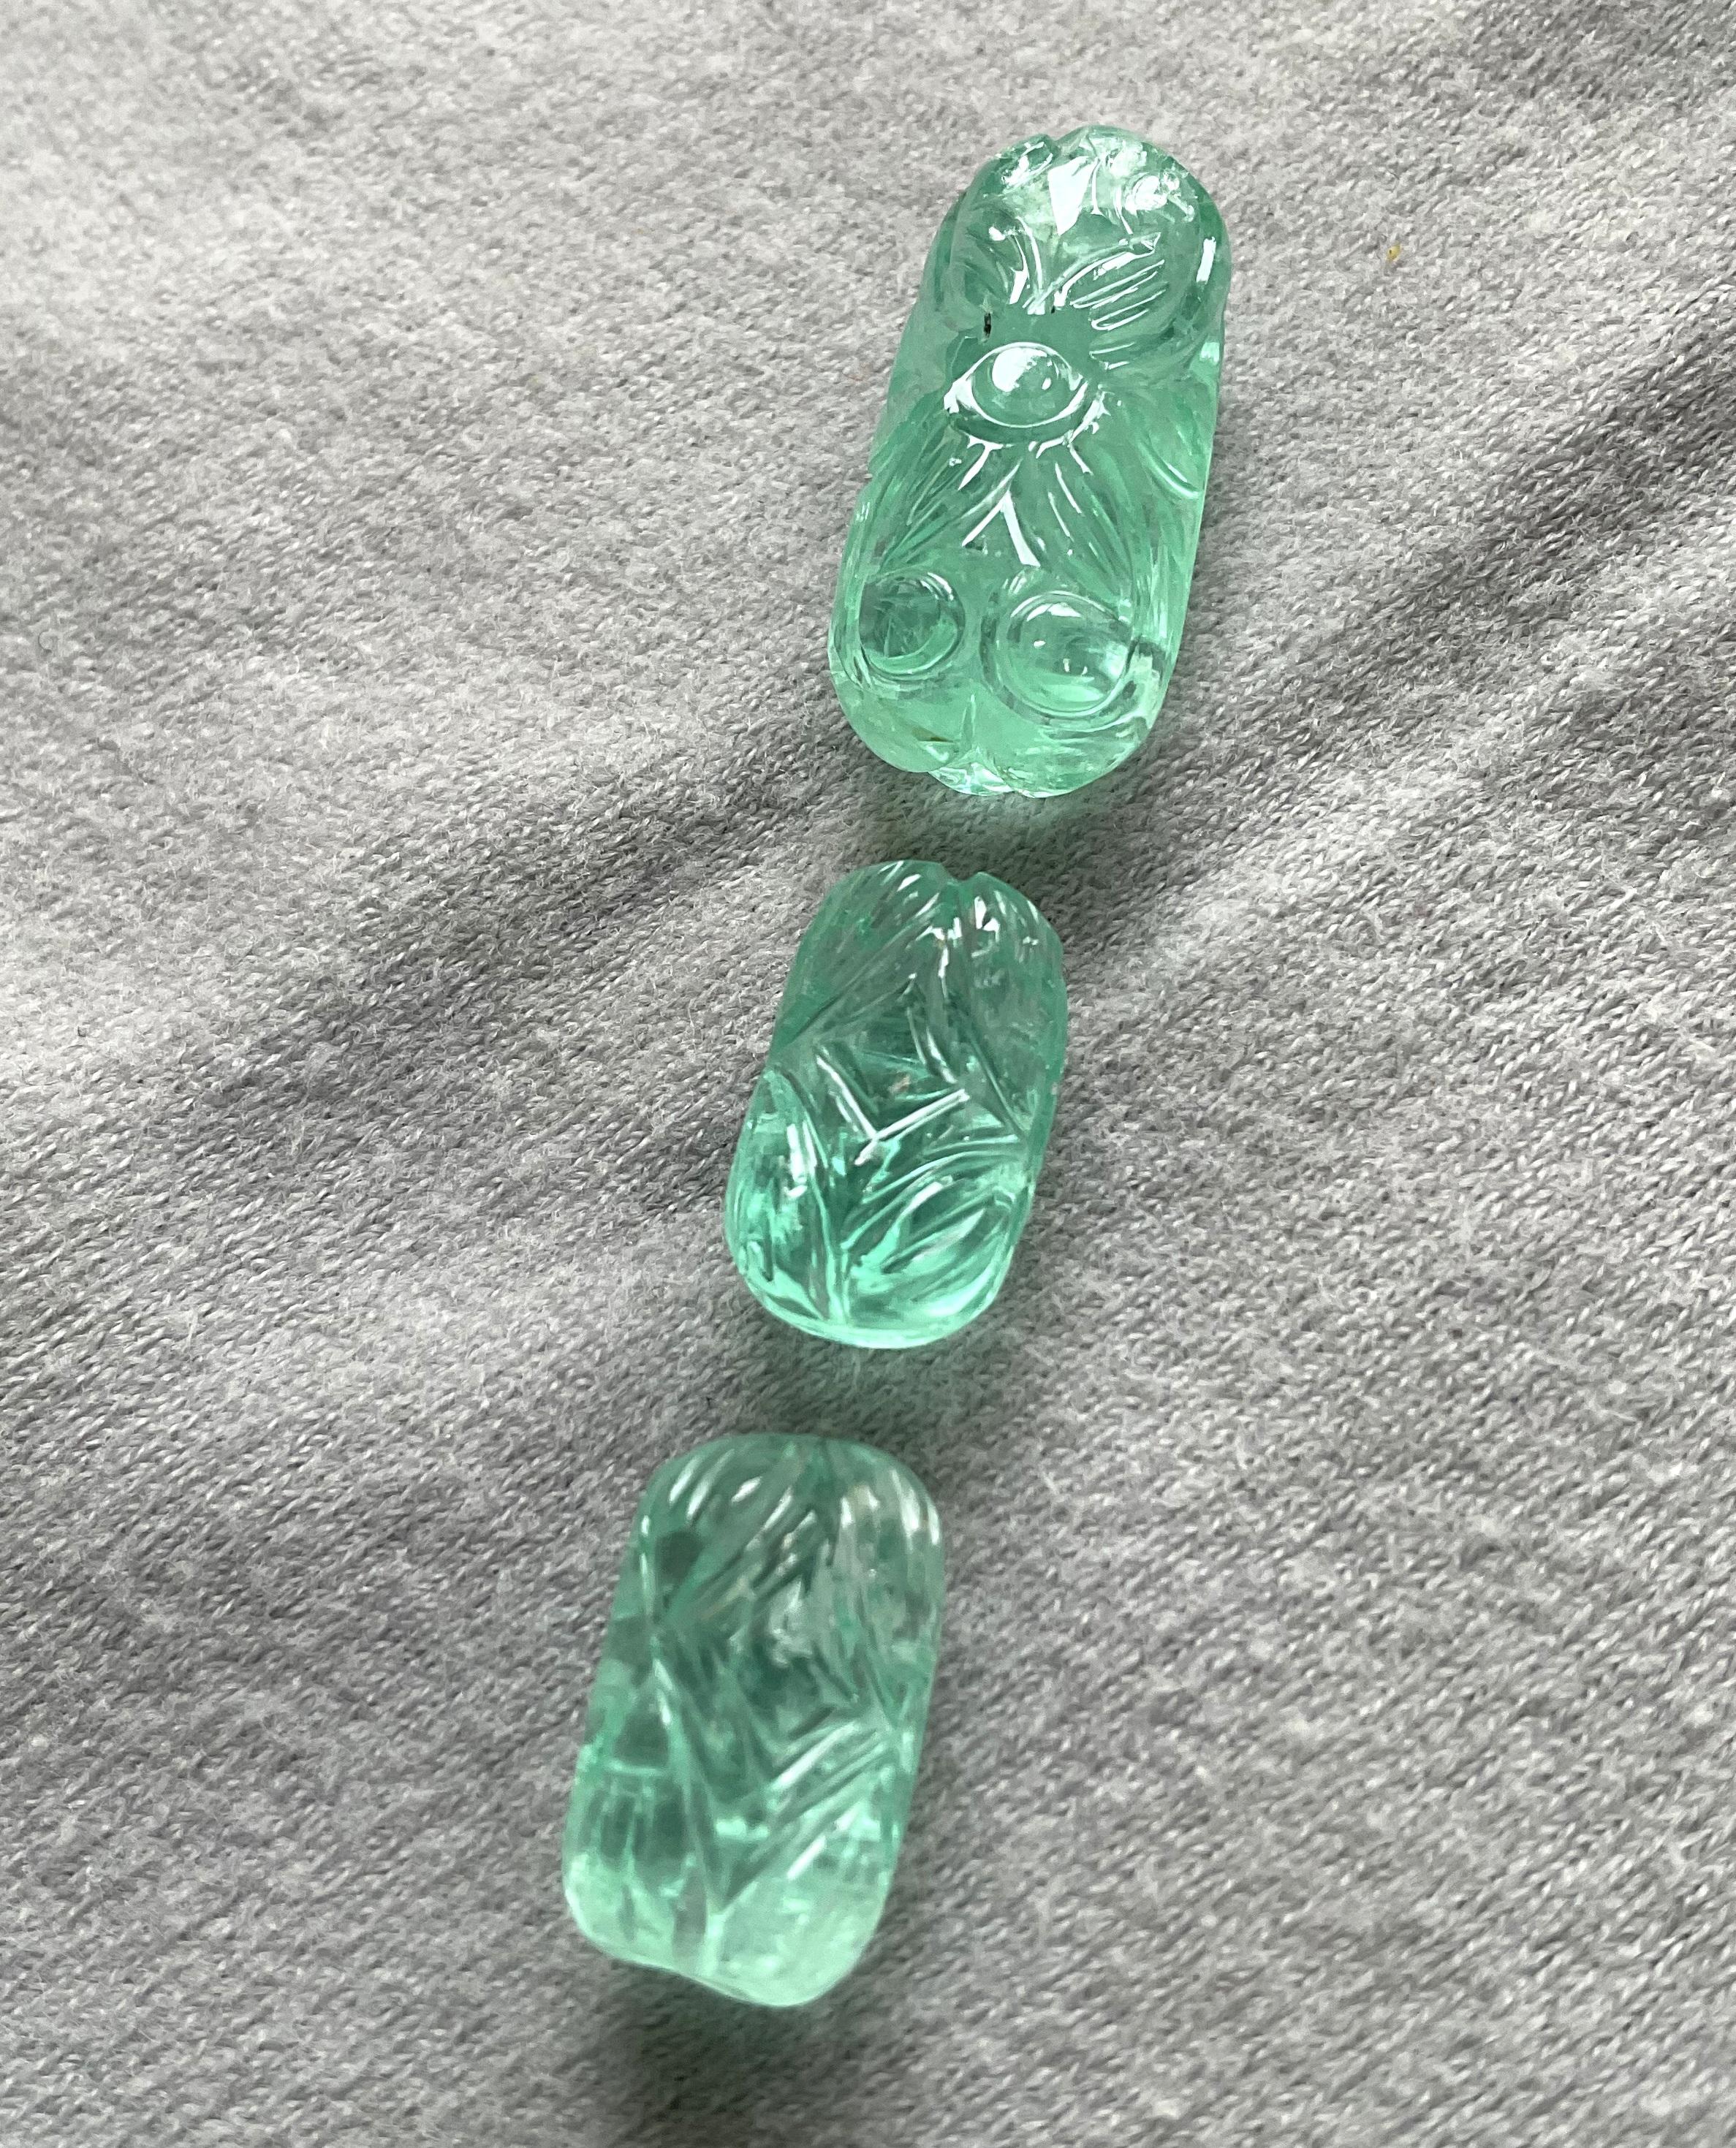 39.93 Carats Russian Emerald Carved 3 Pieces Layout For Jewelry Natural Gemstone In New Condition For Sale In Jaipur, RJ